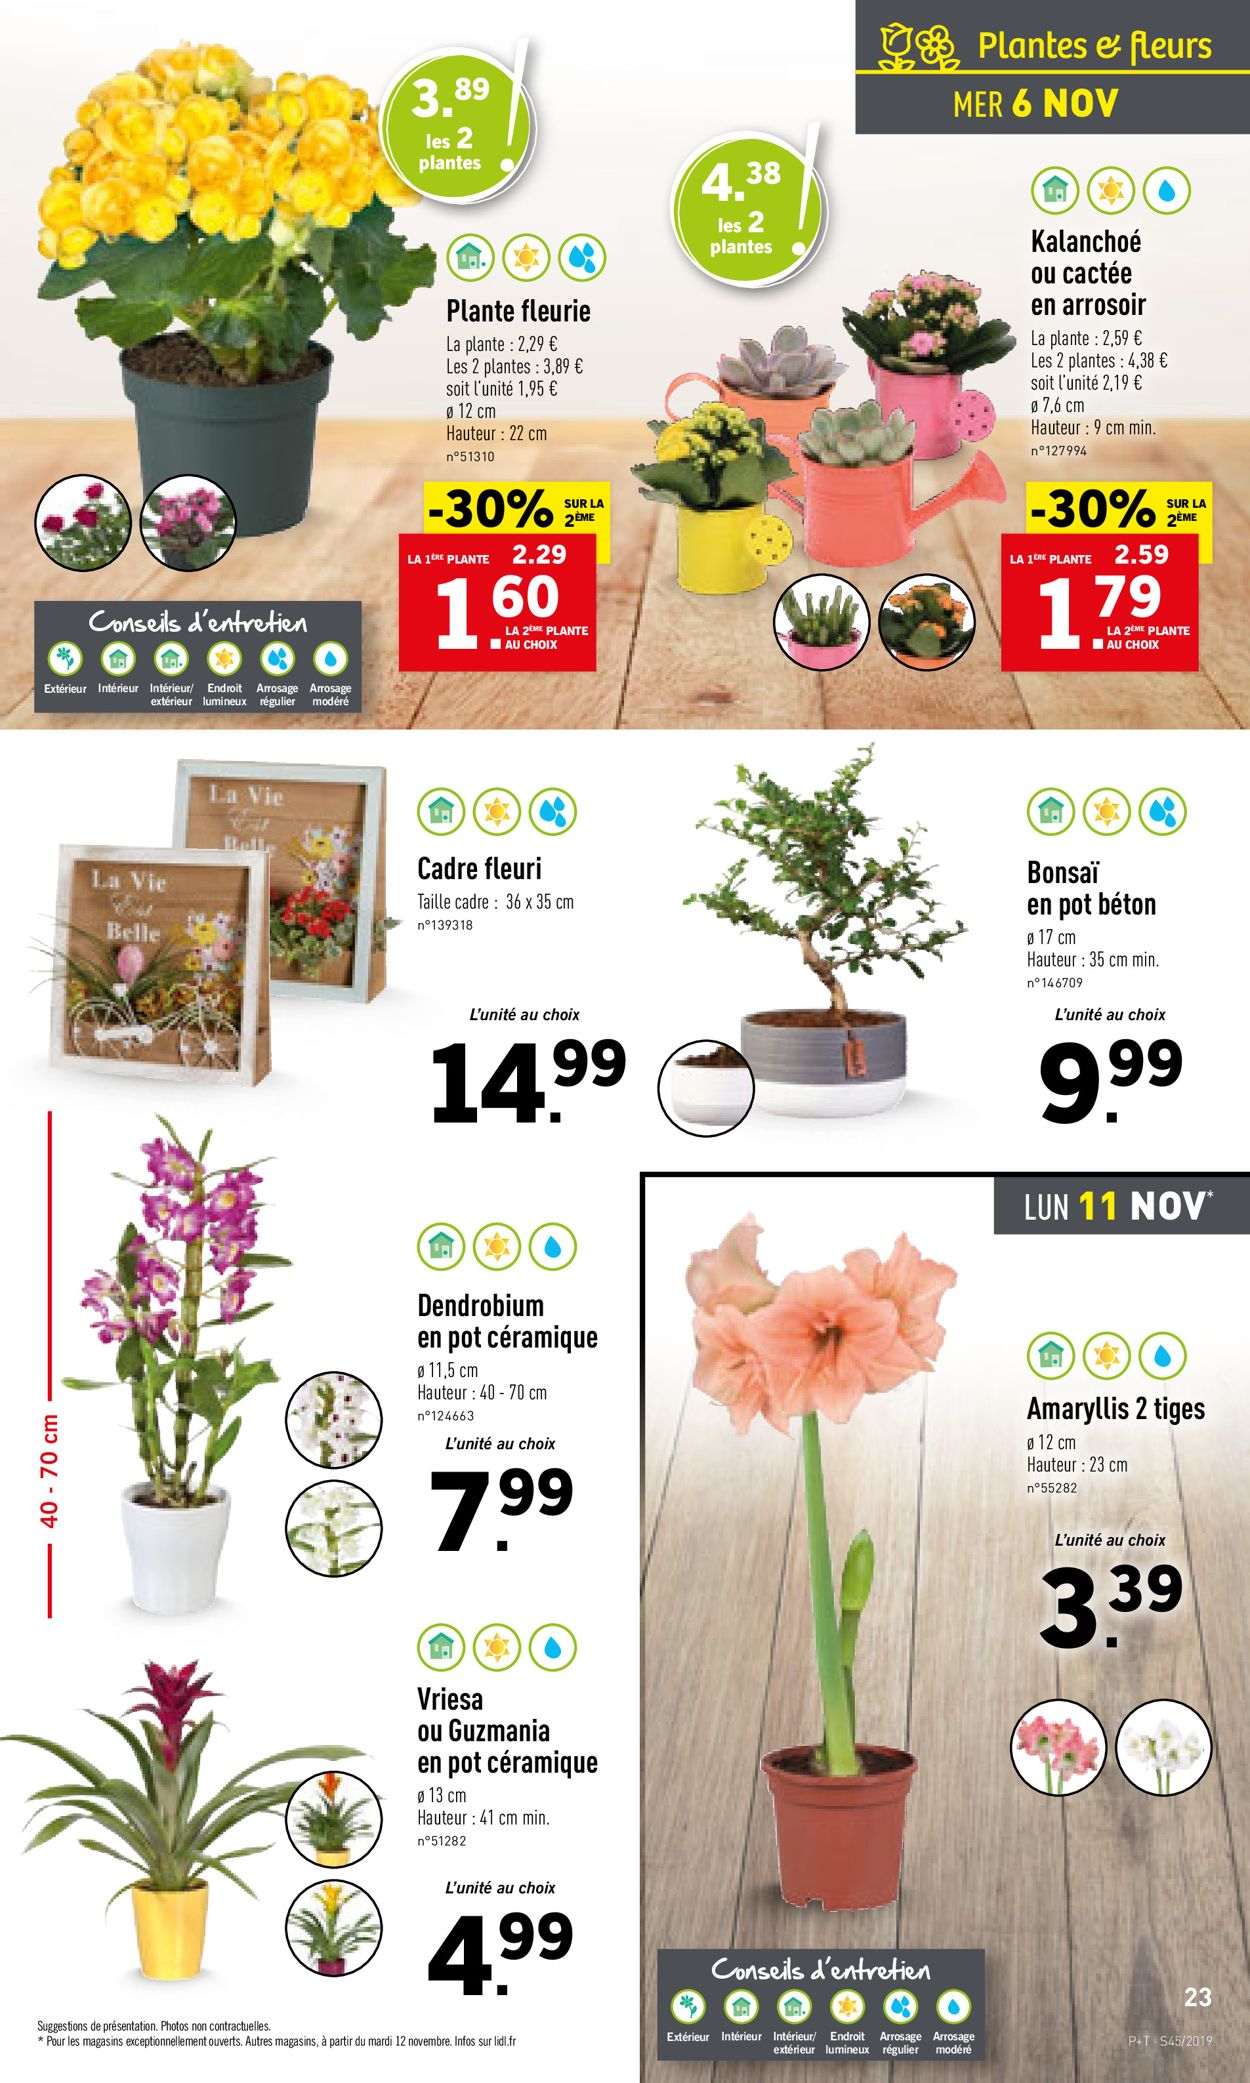 Lidl Catalogue - 06.11-12.11.2019 (Page 23)